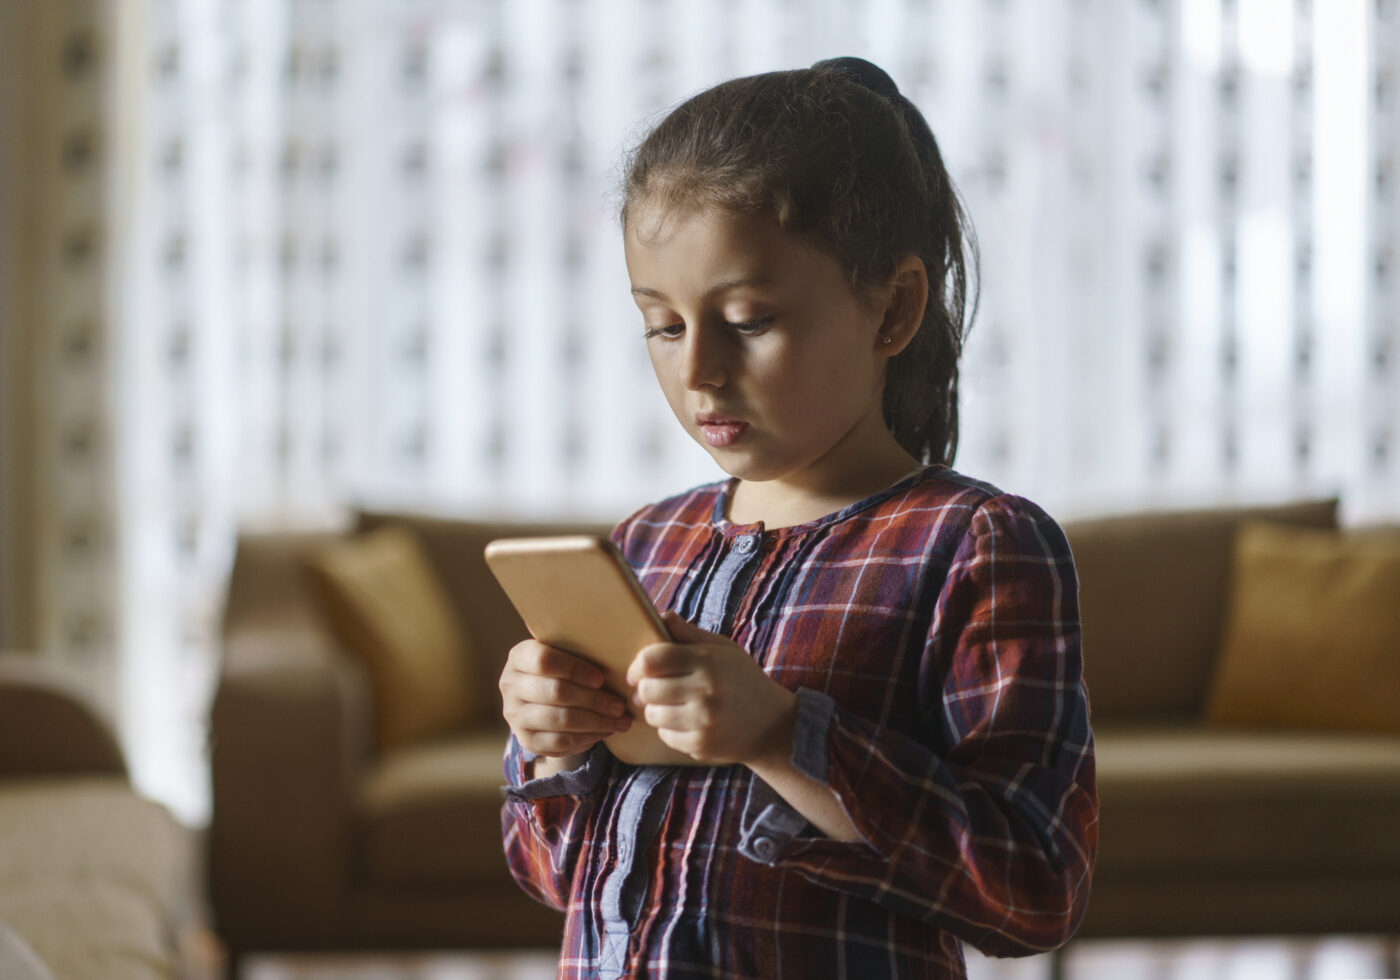 is my child ready for a phone?